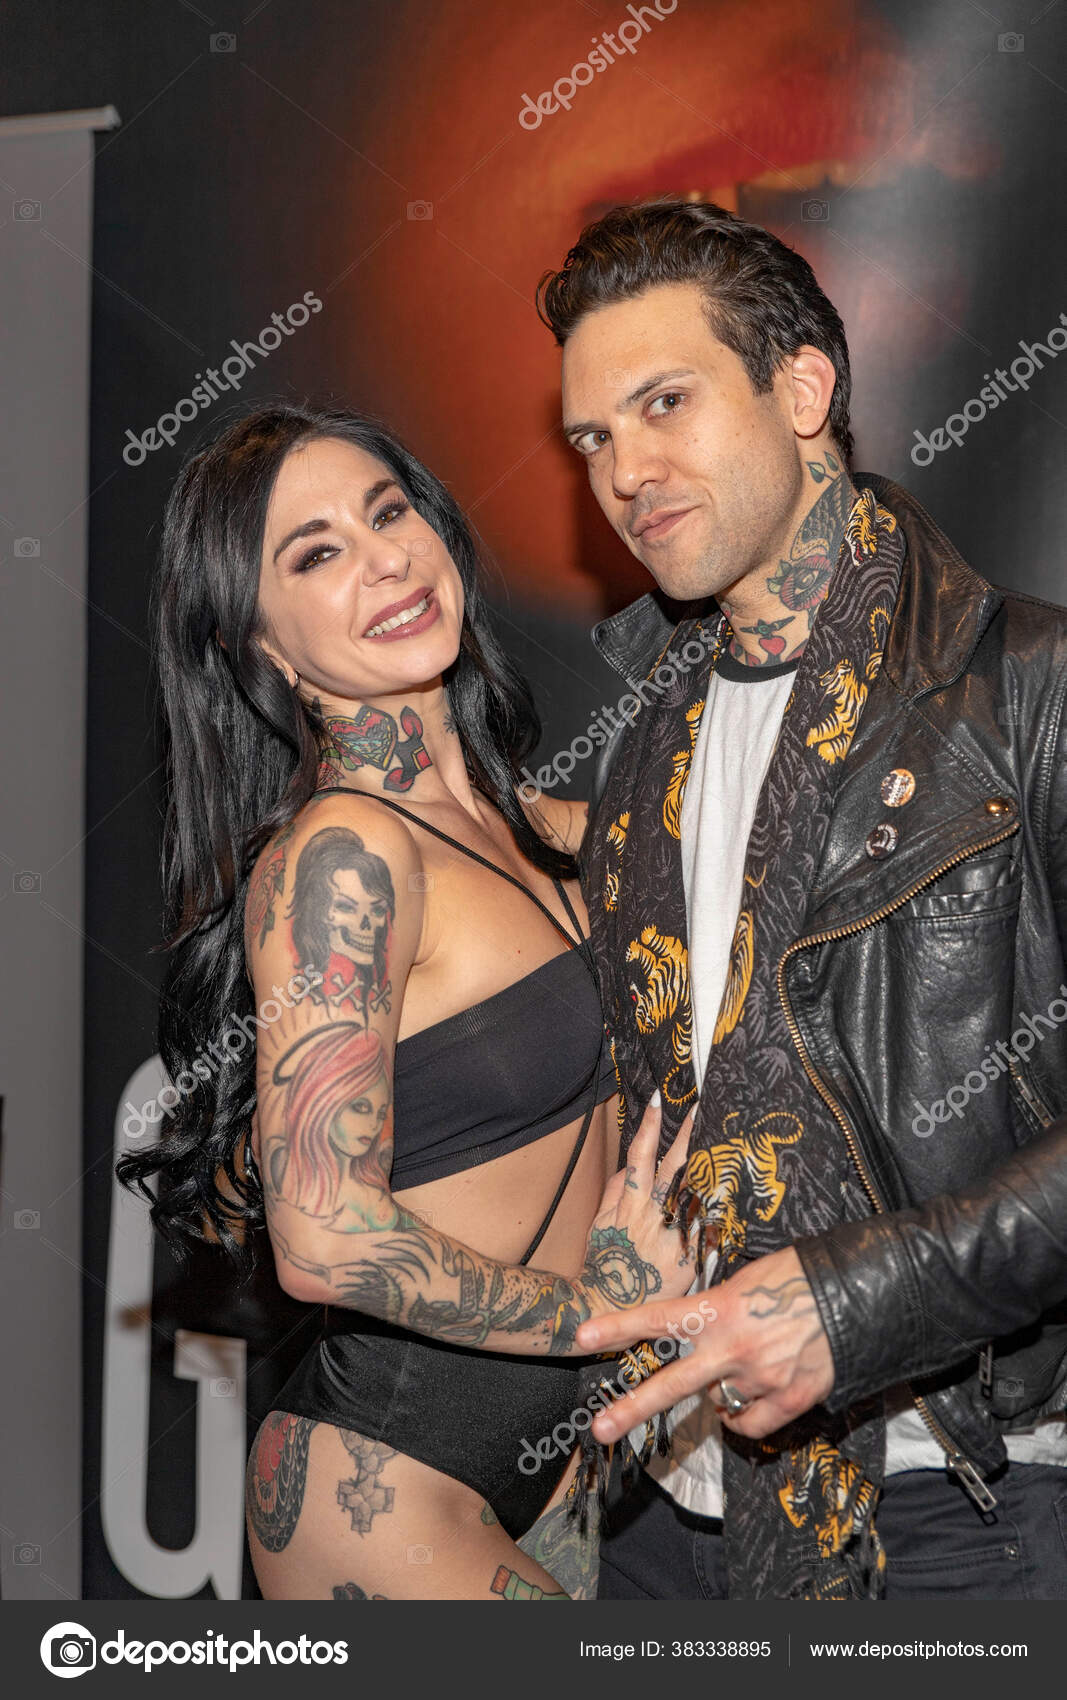 File:Joanna Angel and Small Hands at Inked Awards 2015 (23533477405).jpg -  Wikimedia Commons